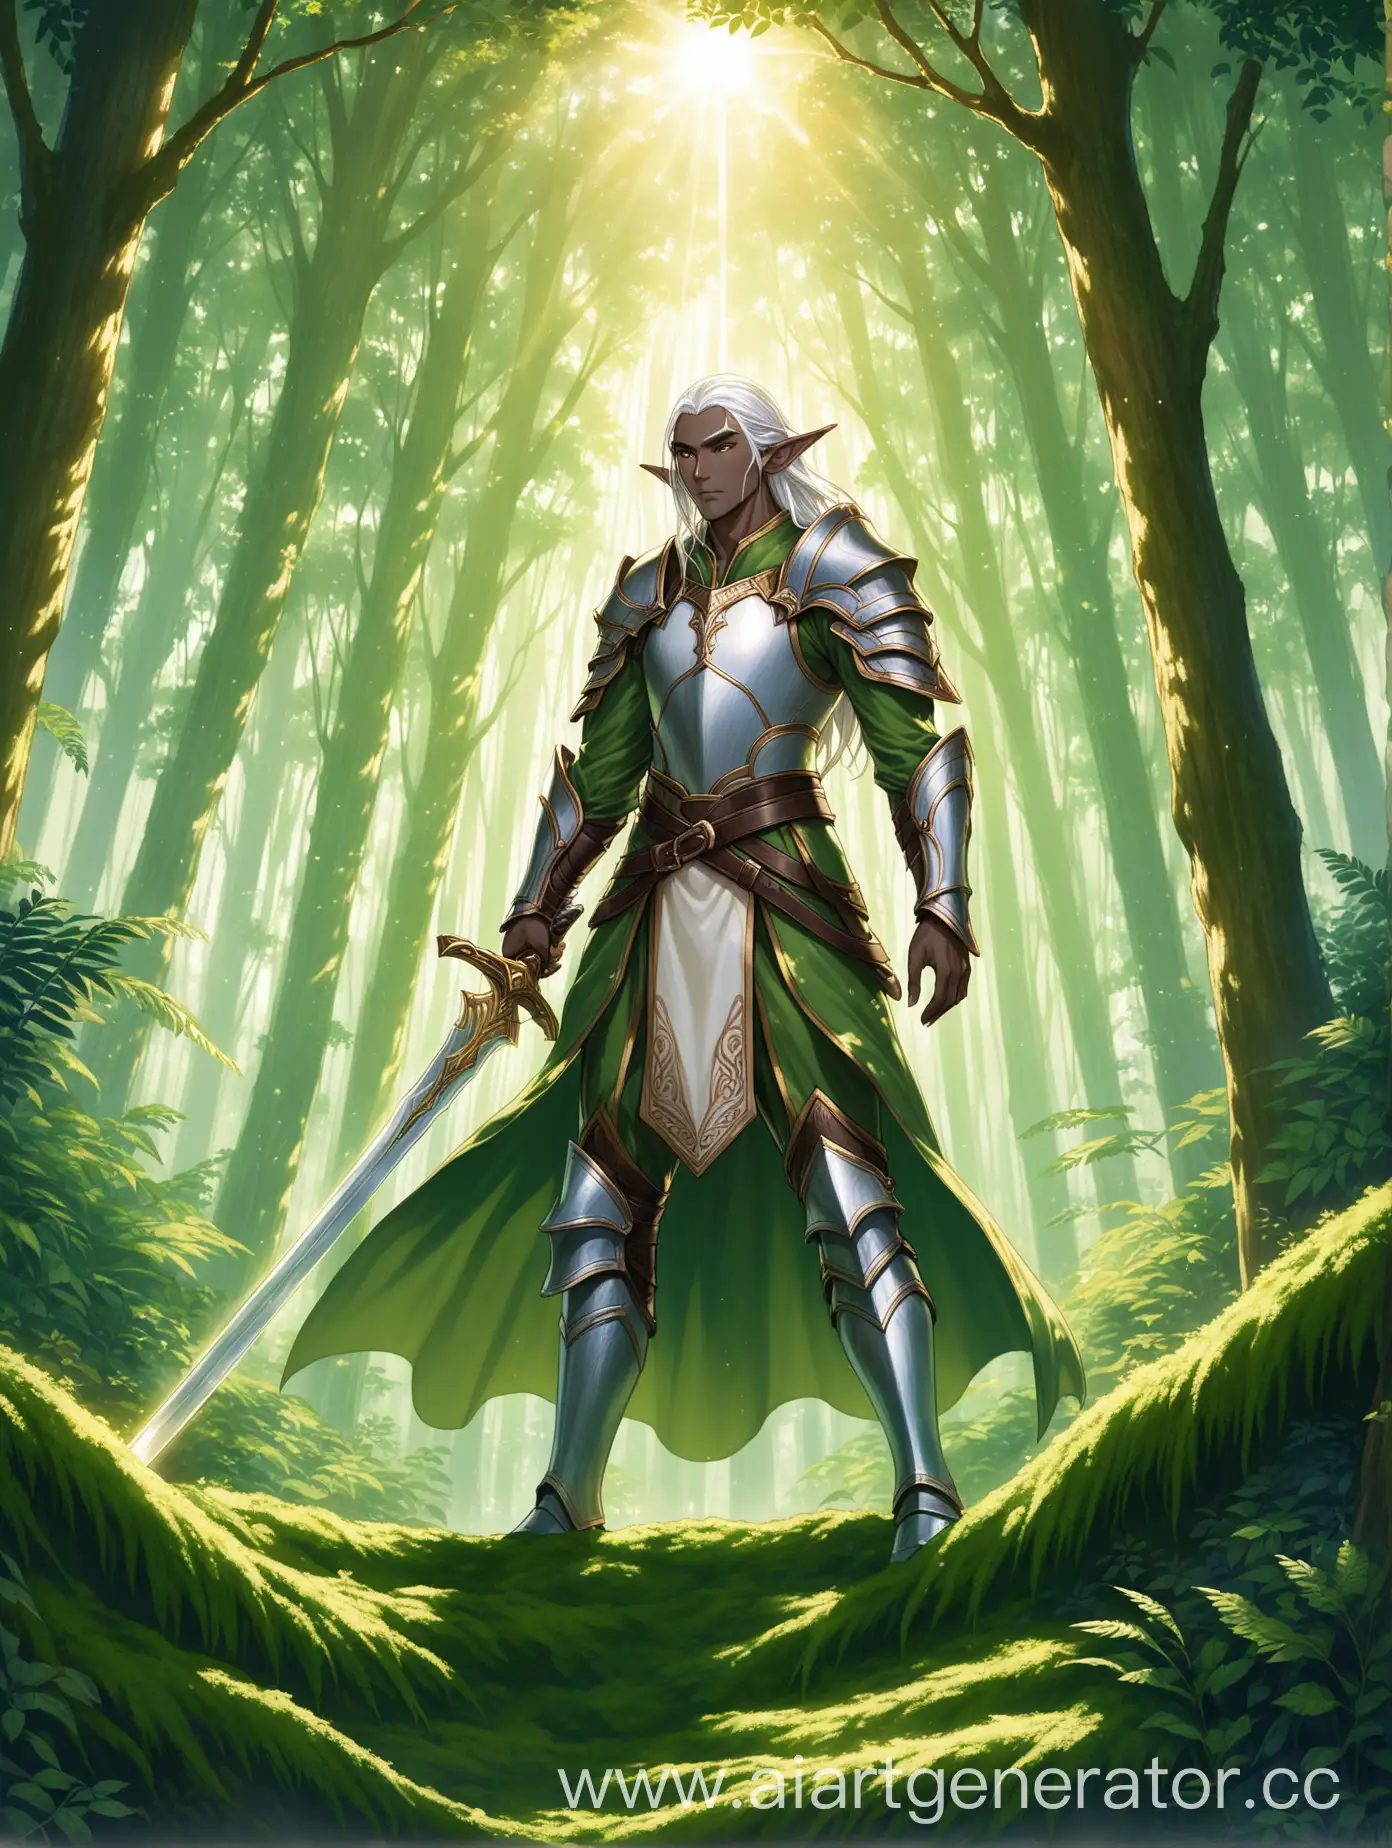 An elven man standing tall and proud in a set of gleaming adventurer armor that hugs his slender, very tall frame. His dark grey skin glistens in the dim light, contrasting beautifully with his long white hair that flows down to his waist, held back only by a simple leather thong. His face is delicately featured, with pointed ears and piercing green eyes that seem to gaze far into the distance, . He holds a sword in his right hand, its blade shining brightly, ready for battle. The sword is decorated with intricate designs that seem to tell a story of ancient wars and heroic deeds. The elf stands in a lush forest clearing, the trees towering around him like sentinels, their leaves rustling gently in the breeze. The ground beneath his feet is covered in a carpet of moss and ferns, and the air is filled with the songs of birds and the hum of insects. The sun peeks through the treetops, casting dappled shadows across the elf's broad chest and powerful shoulders. Realistic anime style